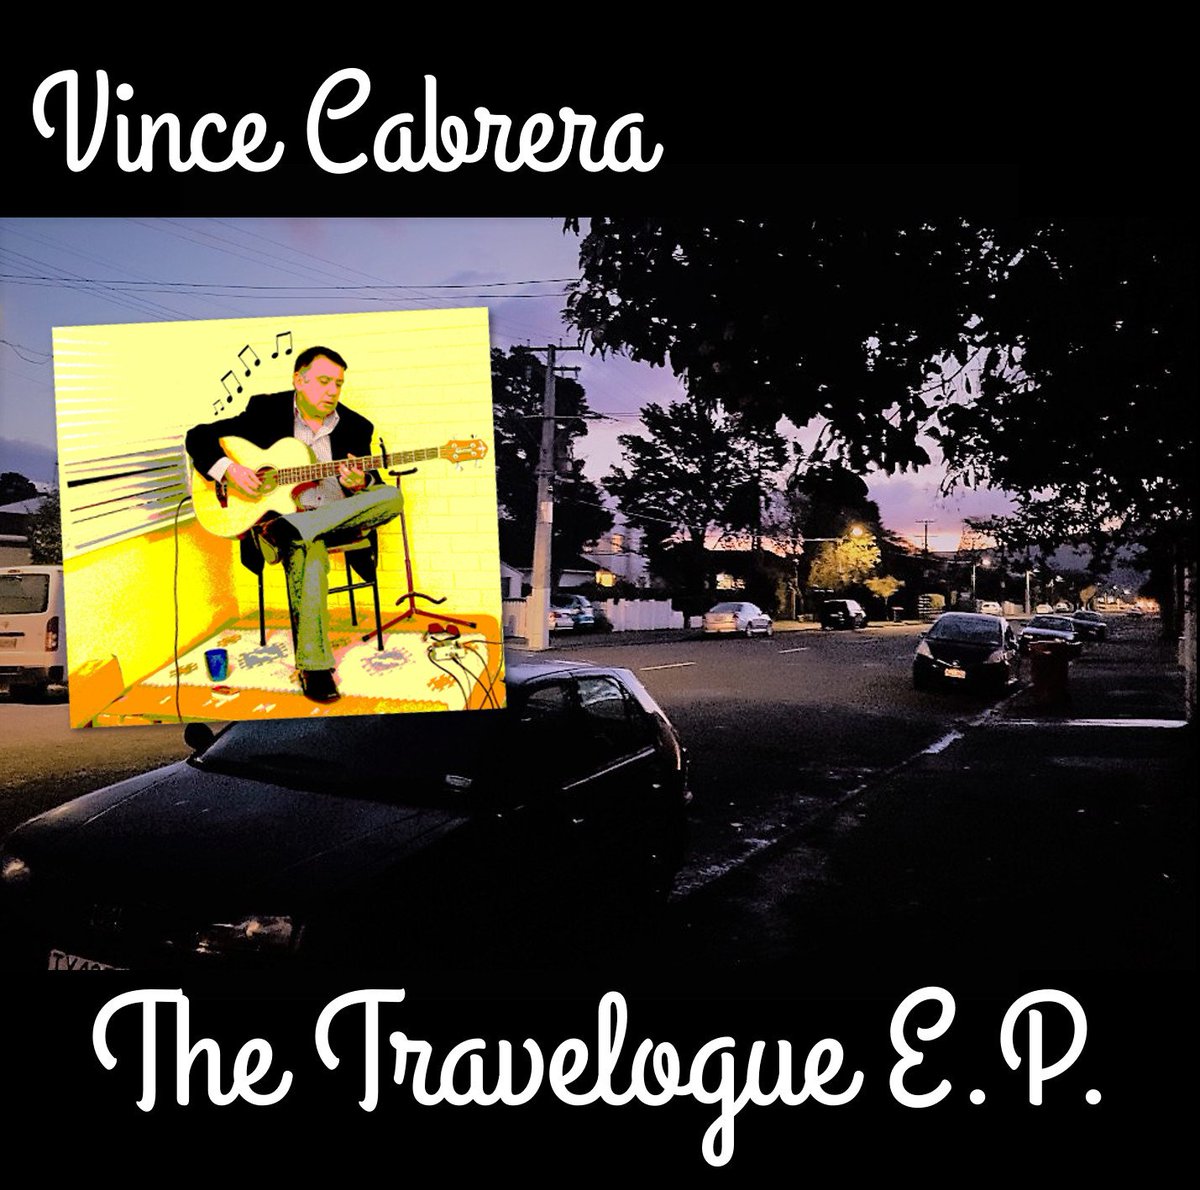 've released an EP! 4 tracks of atmospheric, late-night, acoustic goodness. Check it out on BandCamp

vincecabrera.bandcamp.com/releases

#solobass #acousticbassguitar #acoustic #solobassguitar